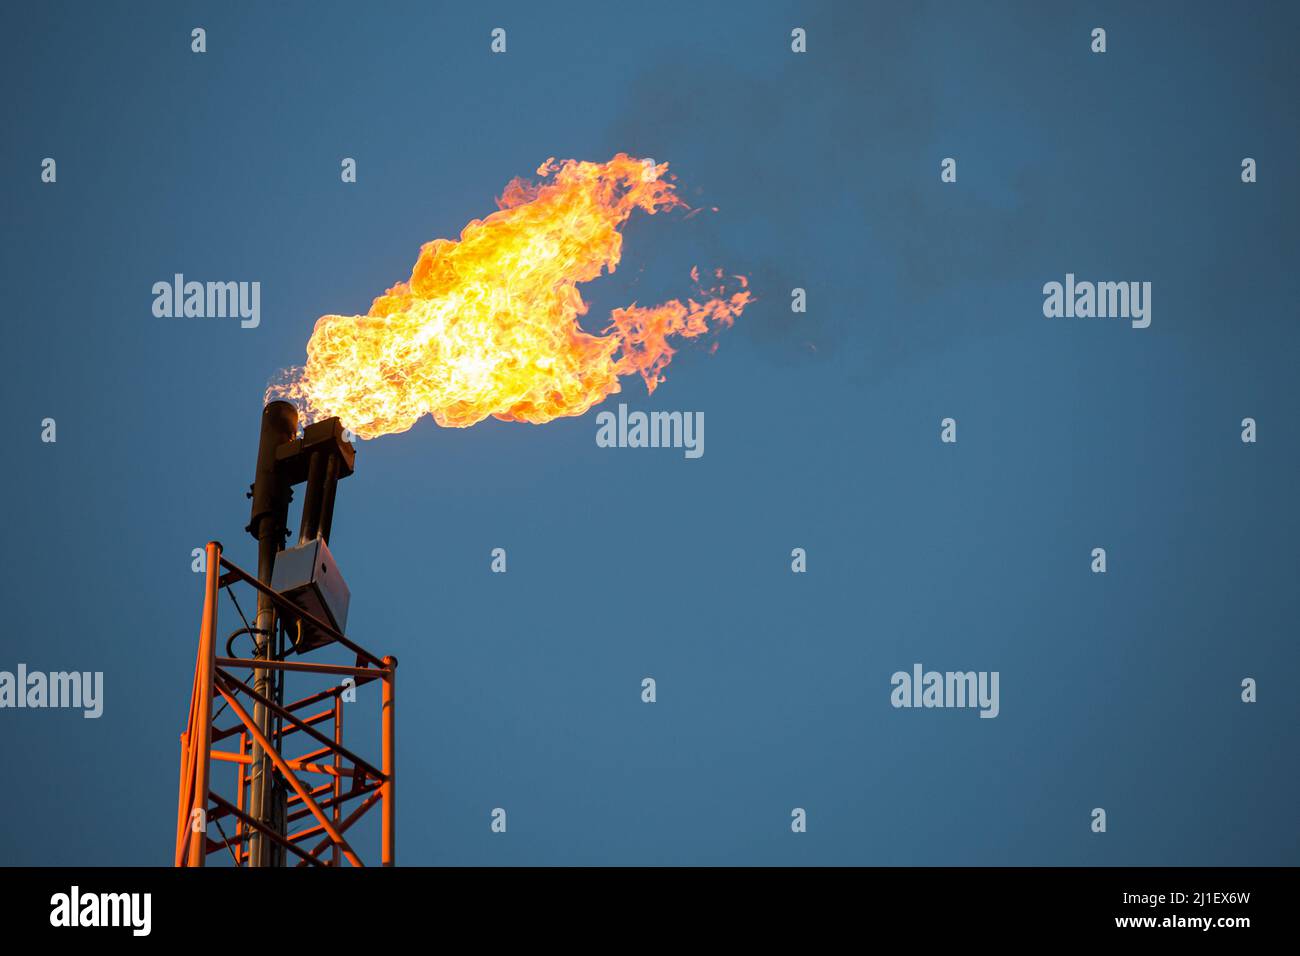 A burning flare seen at an oil extraction area located in Lakie, Lubusz Voivodeship. The characteristic flaming flare is formed by the combustion of natural gas, which is extracted along with crude oil. It is used when the operator does not have a gas transmission installation or the further management of the extracted raw material is economically unprofitable. PGNiG (Polish Oil Mining and Gas Extraction S.A.) plans to spend PLN 10.8 billion on investments in 2022, the company announced in its annual report. The estimated oil production in Poland in 2022 is 0.677 million tones. Stock Photo